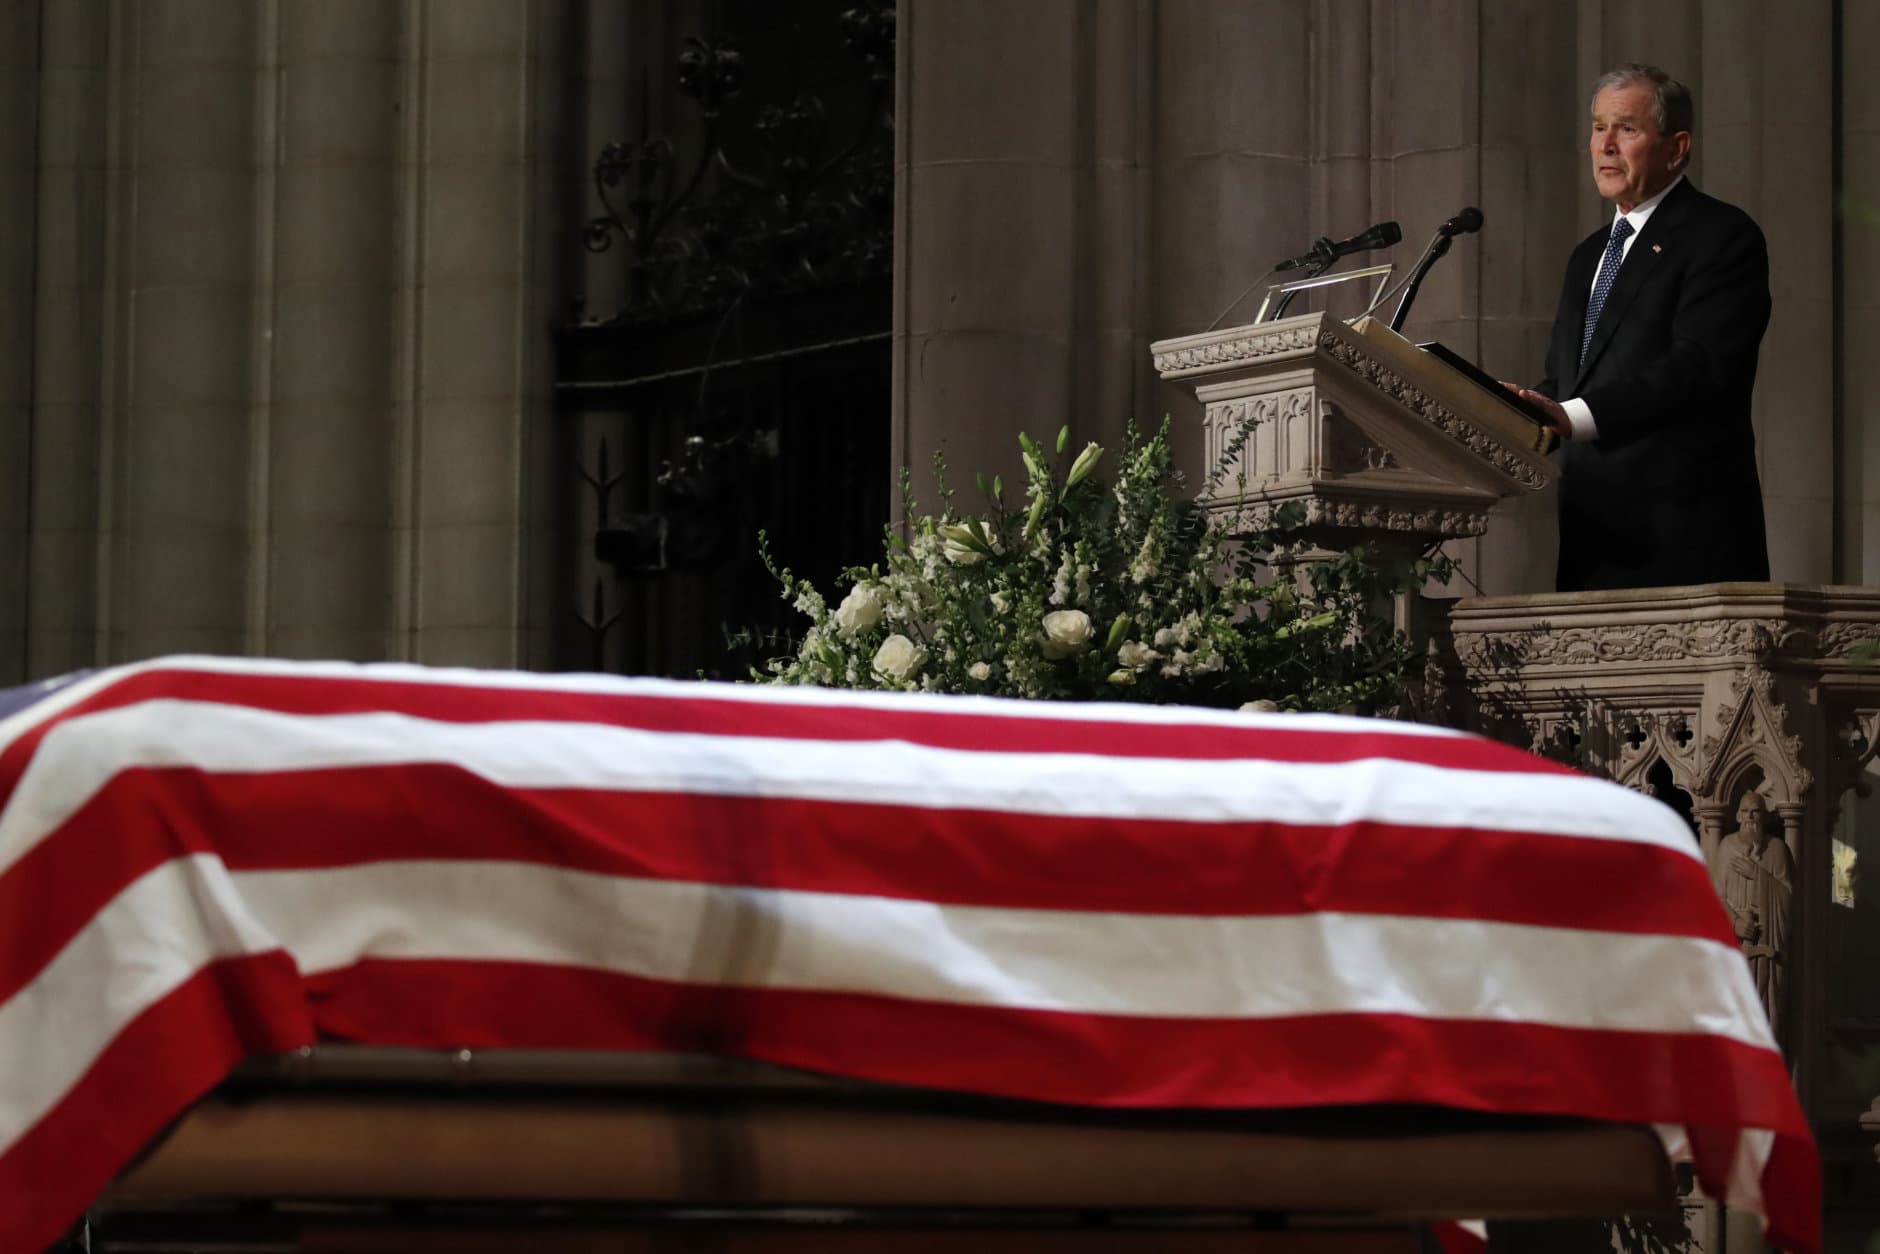 Former President George W. Bush speaks in front of the flag-draped casket of his father, former President George H.W. Bush, at the State Funeral at the National Cathedral, Wednesday, Dec. 5, 2018, in Washington. (AP Photo/Alex Brandon, Pool)